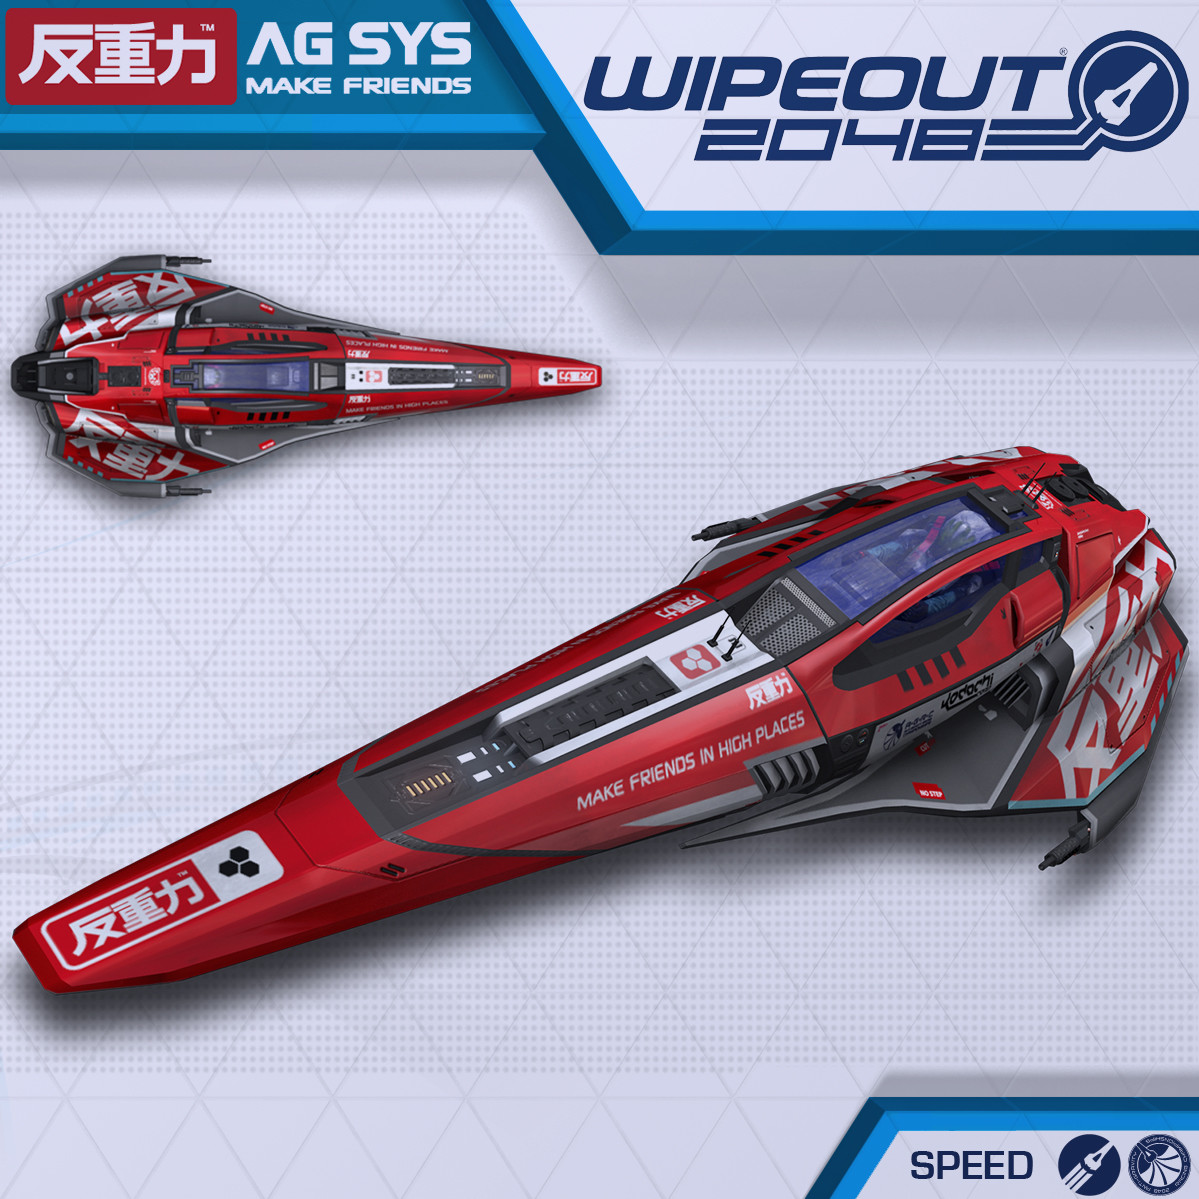 wipeout 2048 cover